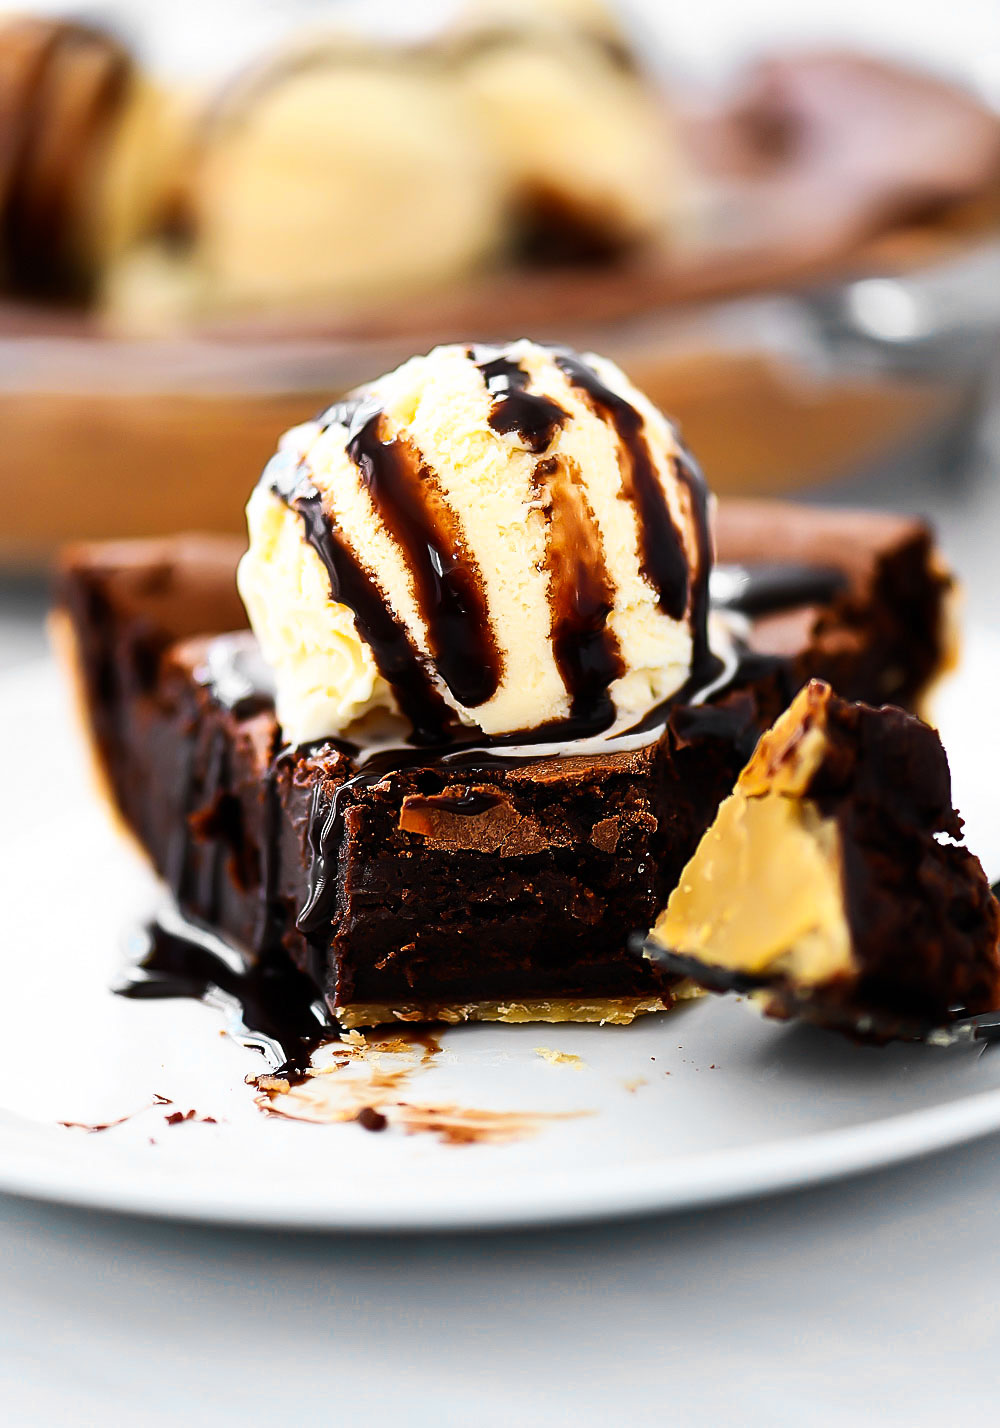 A rich fudge-like brownie batter baked over a flaky pie crust.